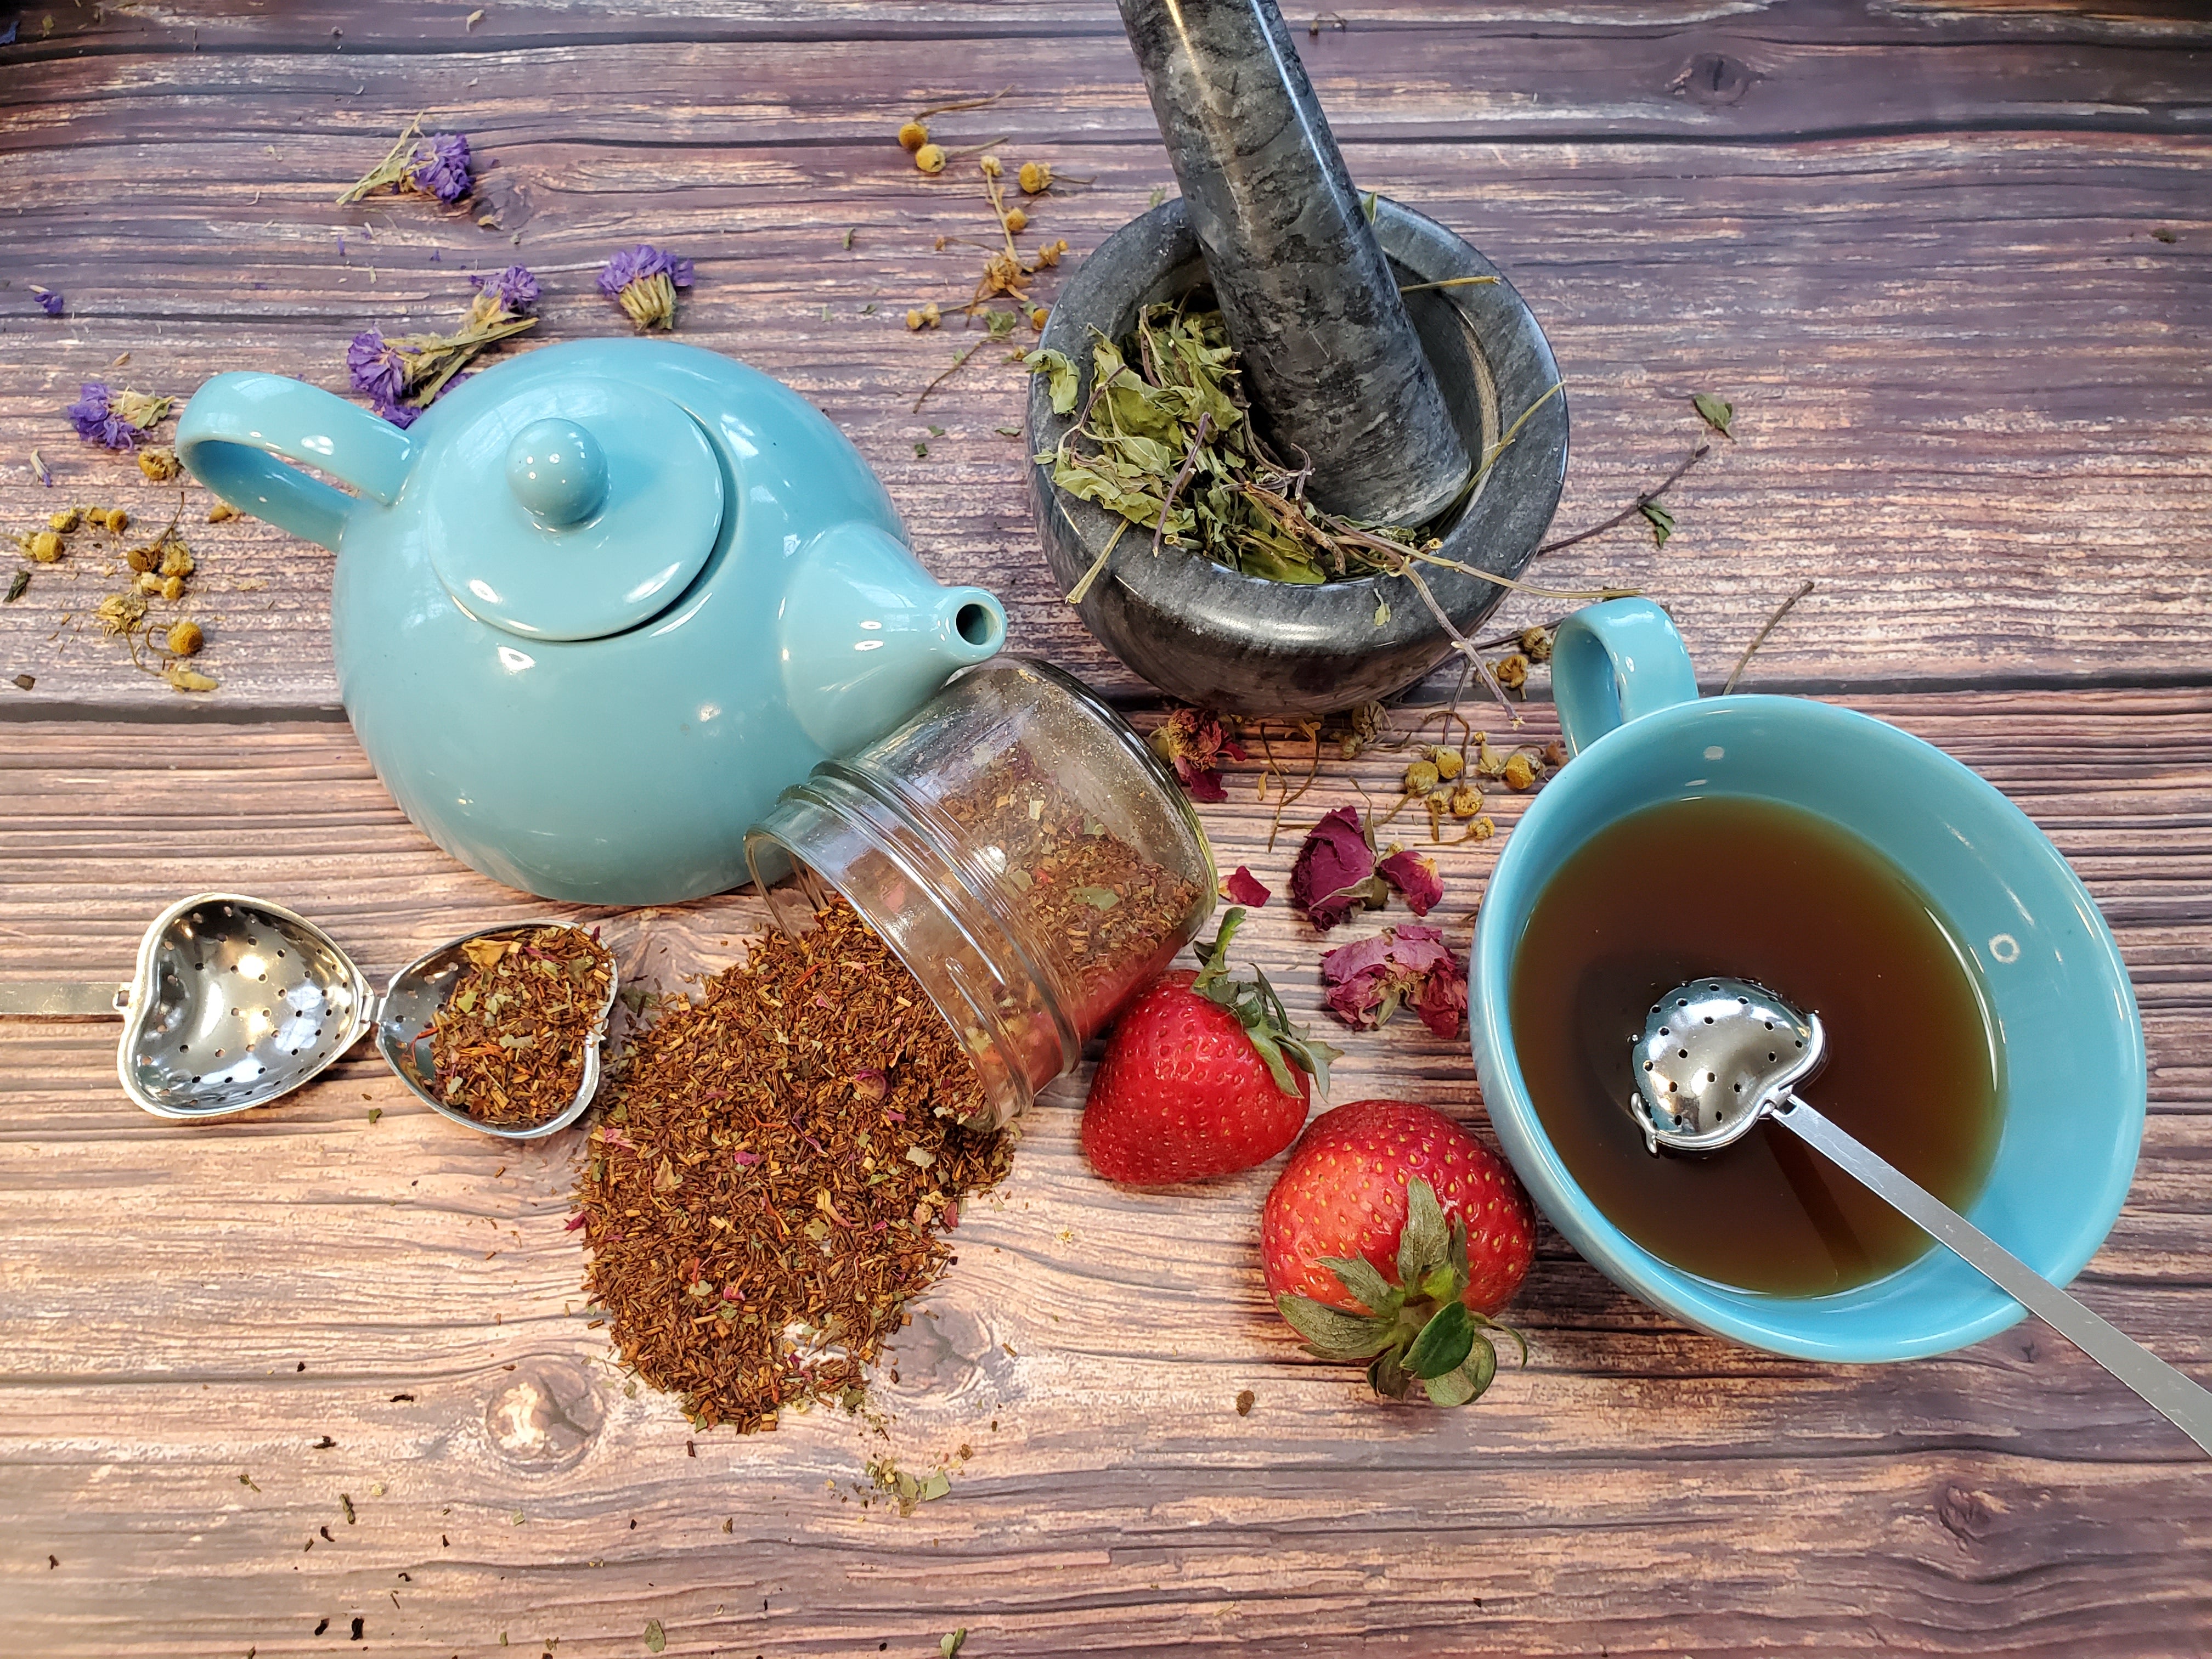 Strawberry Fields Tea Blend is a wonderful tea blend that is infused with delicious strawberries which make for a refreshing cup of tea.